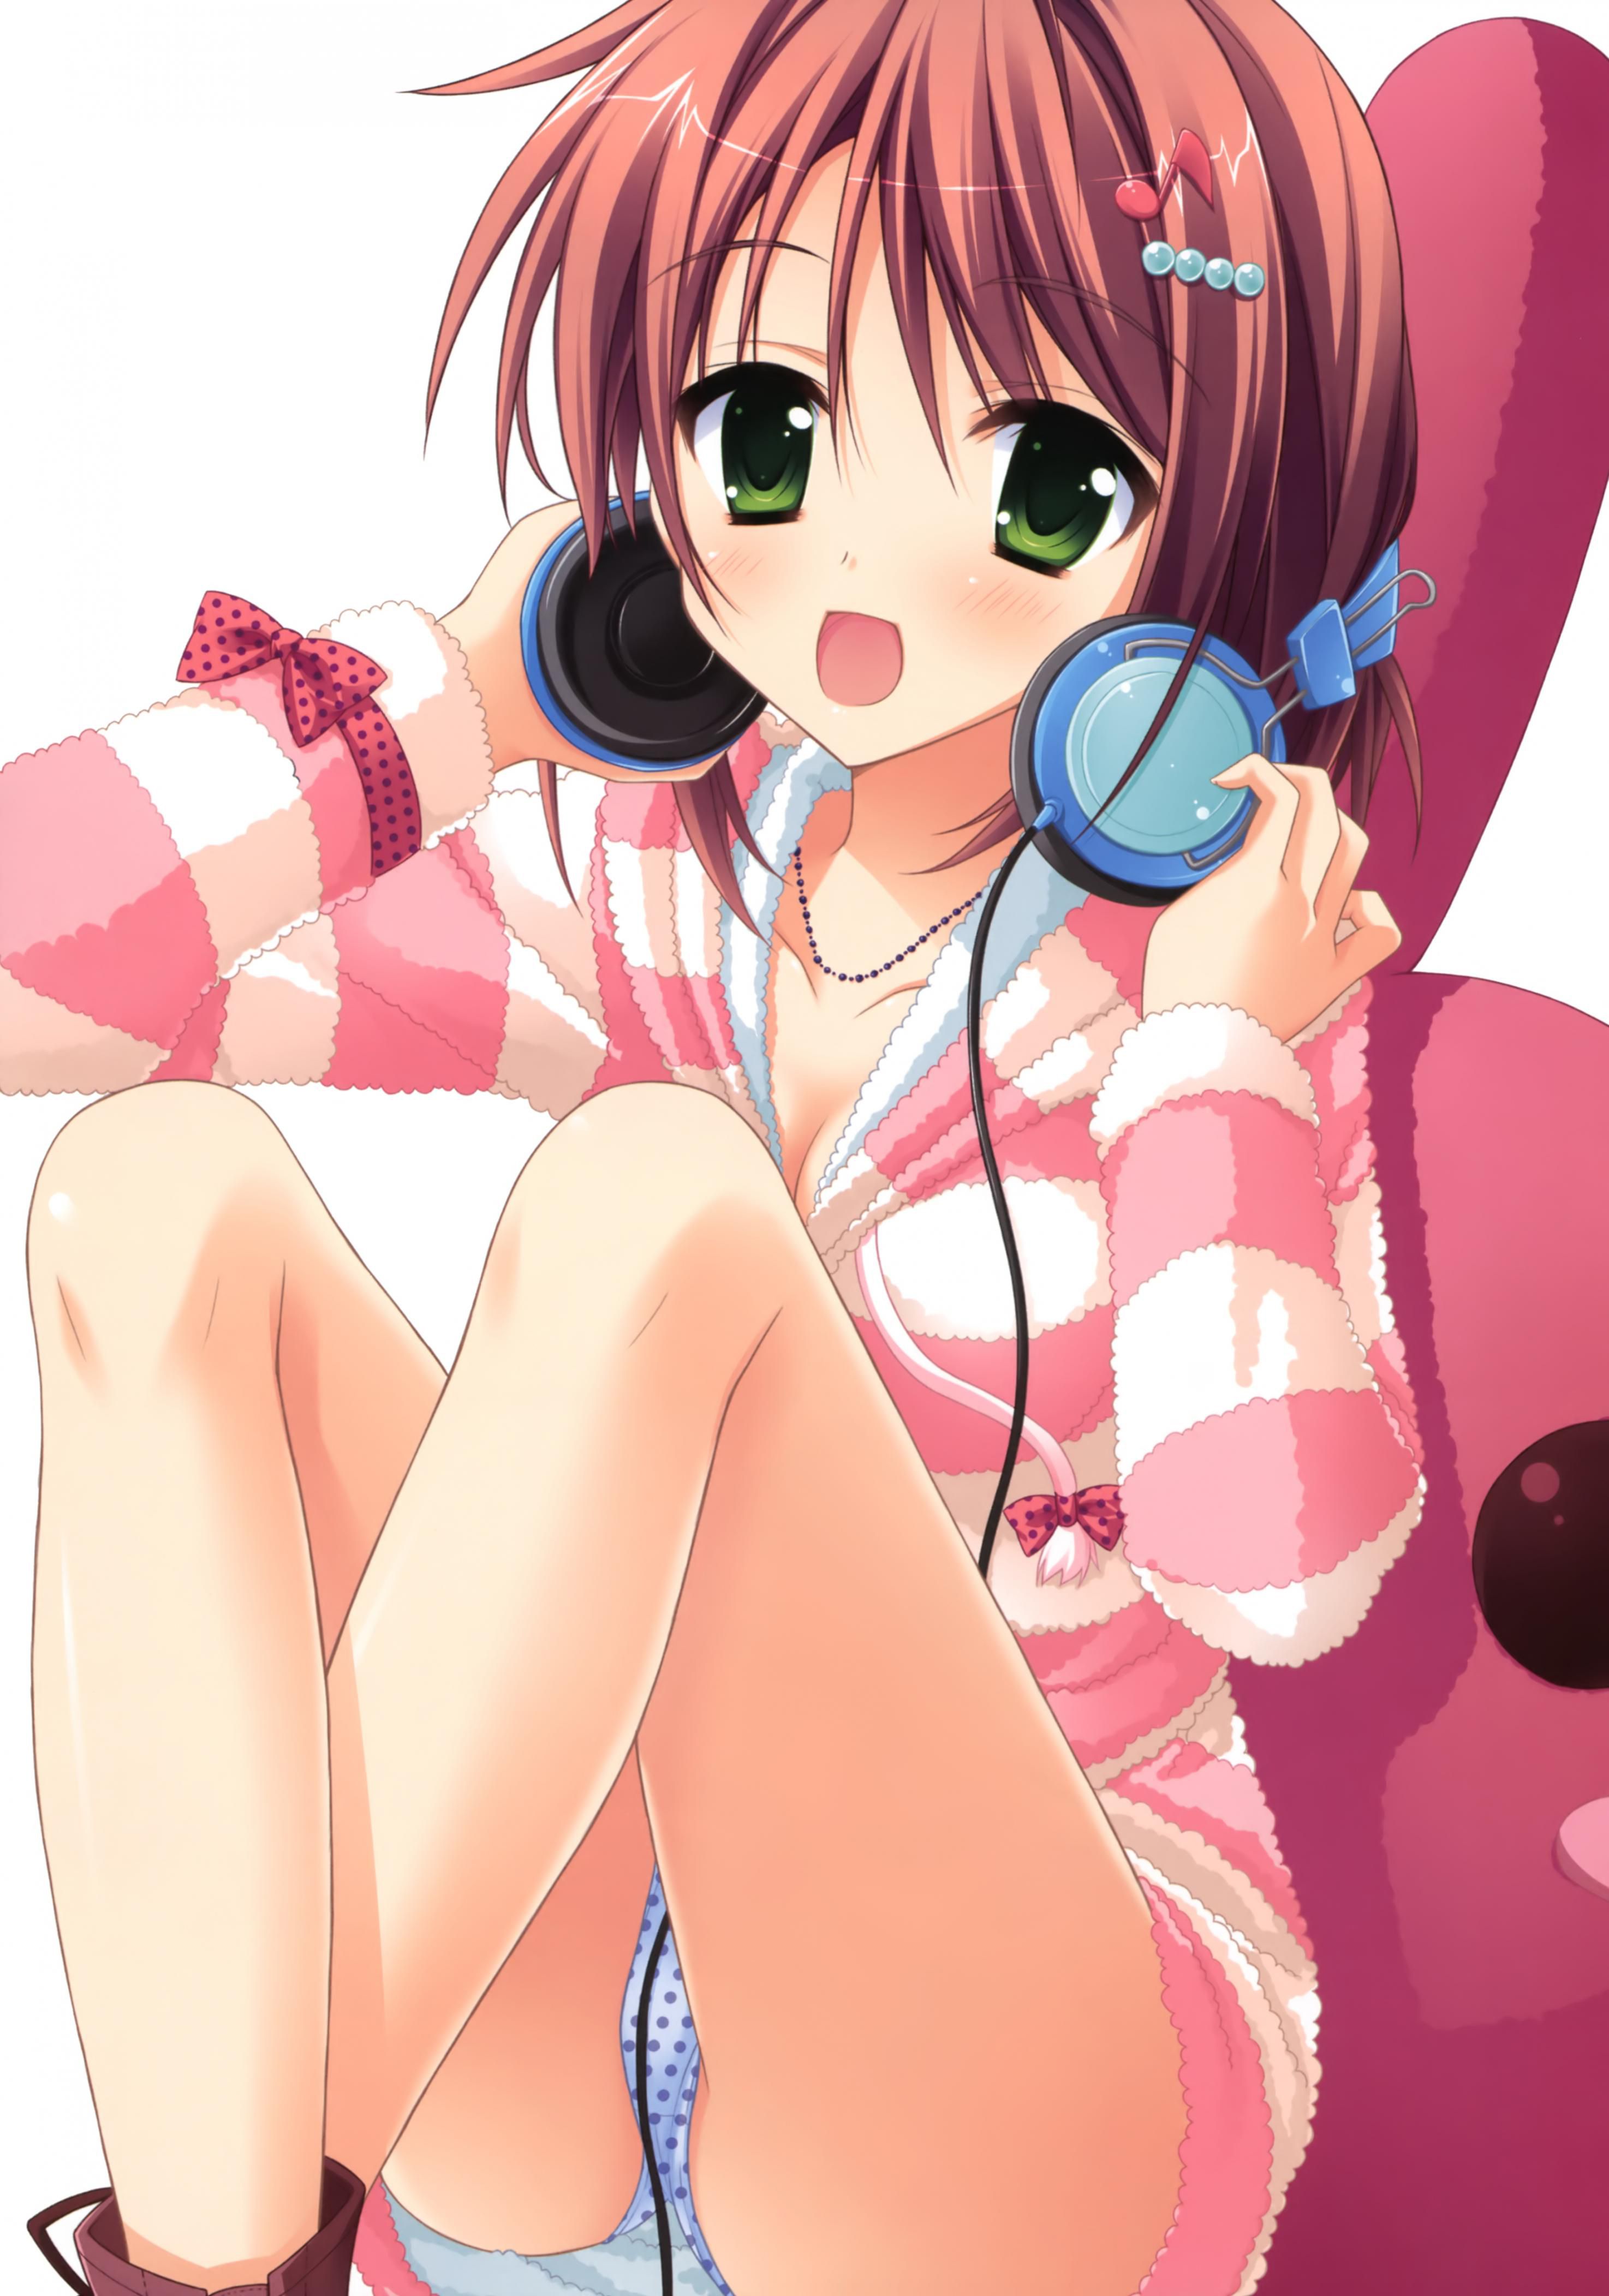 [Secondary] girl I have the headphones (headphones) [images] 14